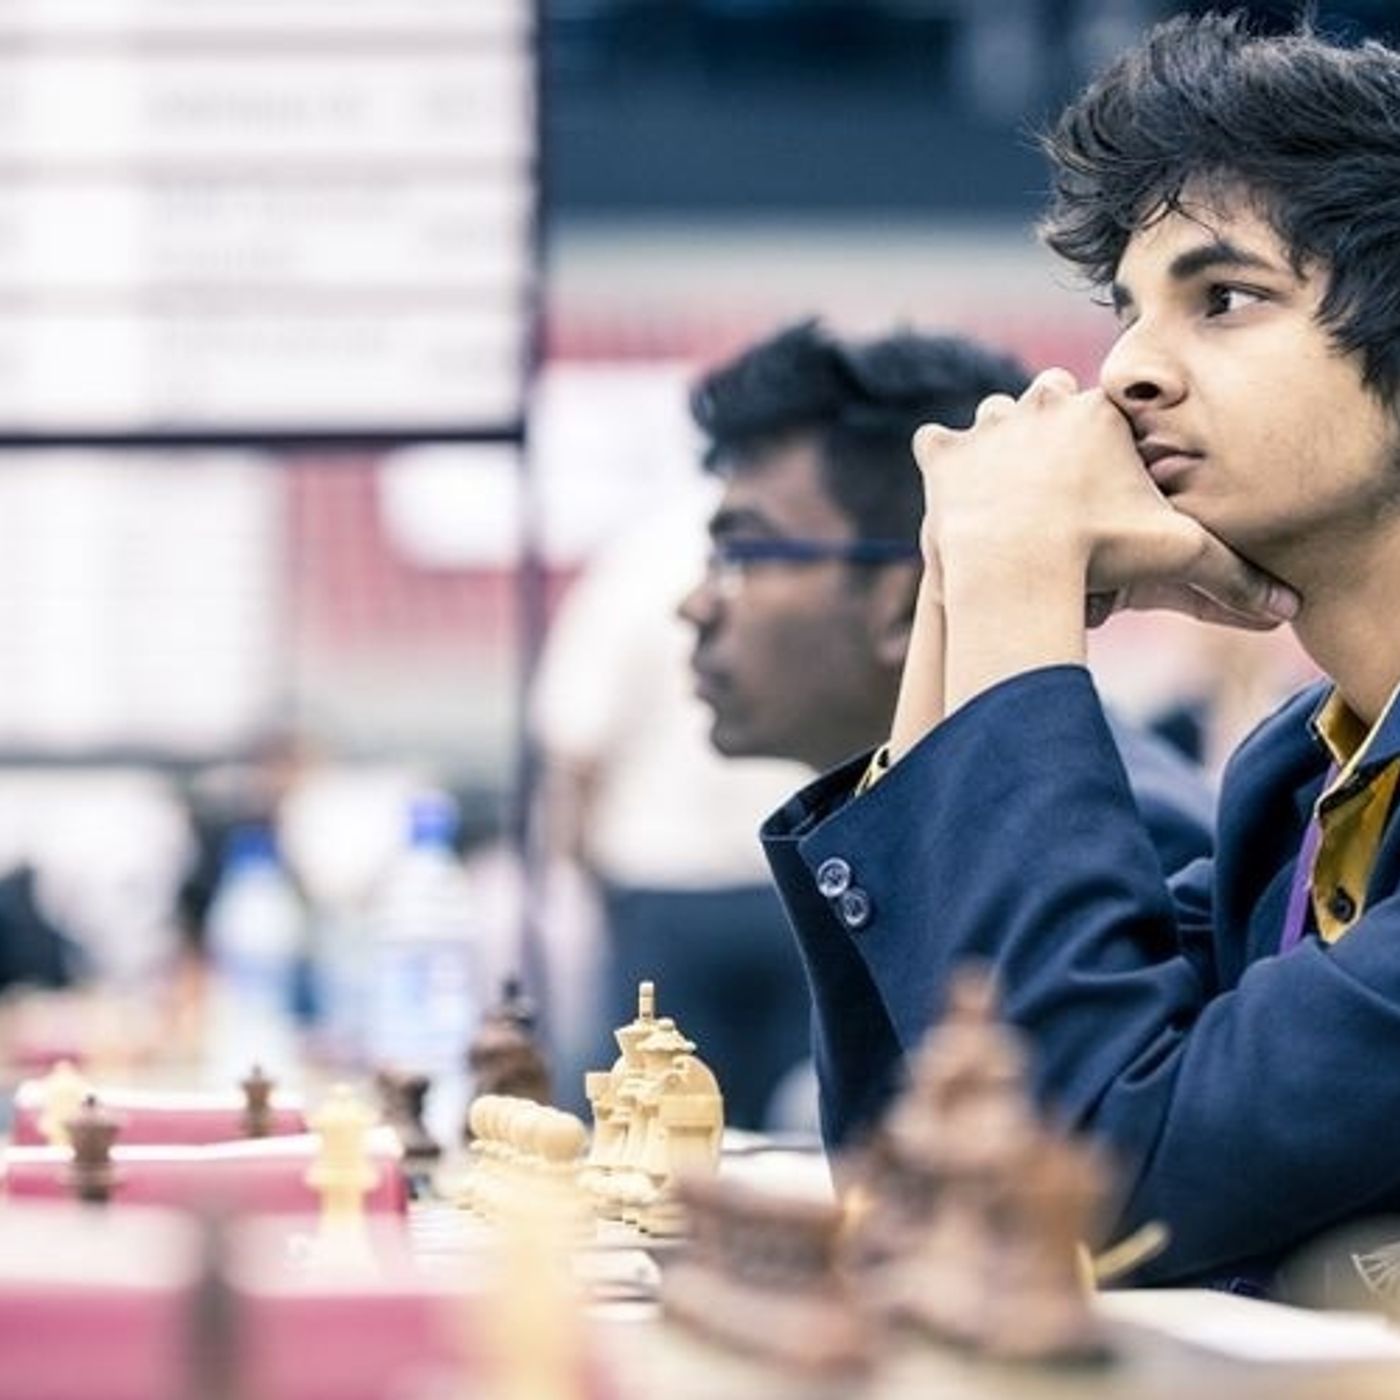 11: Firstpost Masterclass Episode 11: Practice, reflect and be mindful, Vidit Gujrathi delves into the making of chess Grandmaster